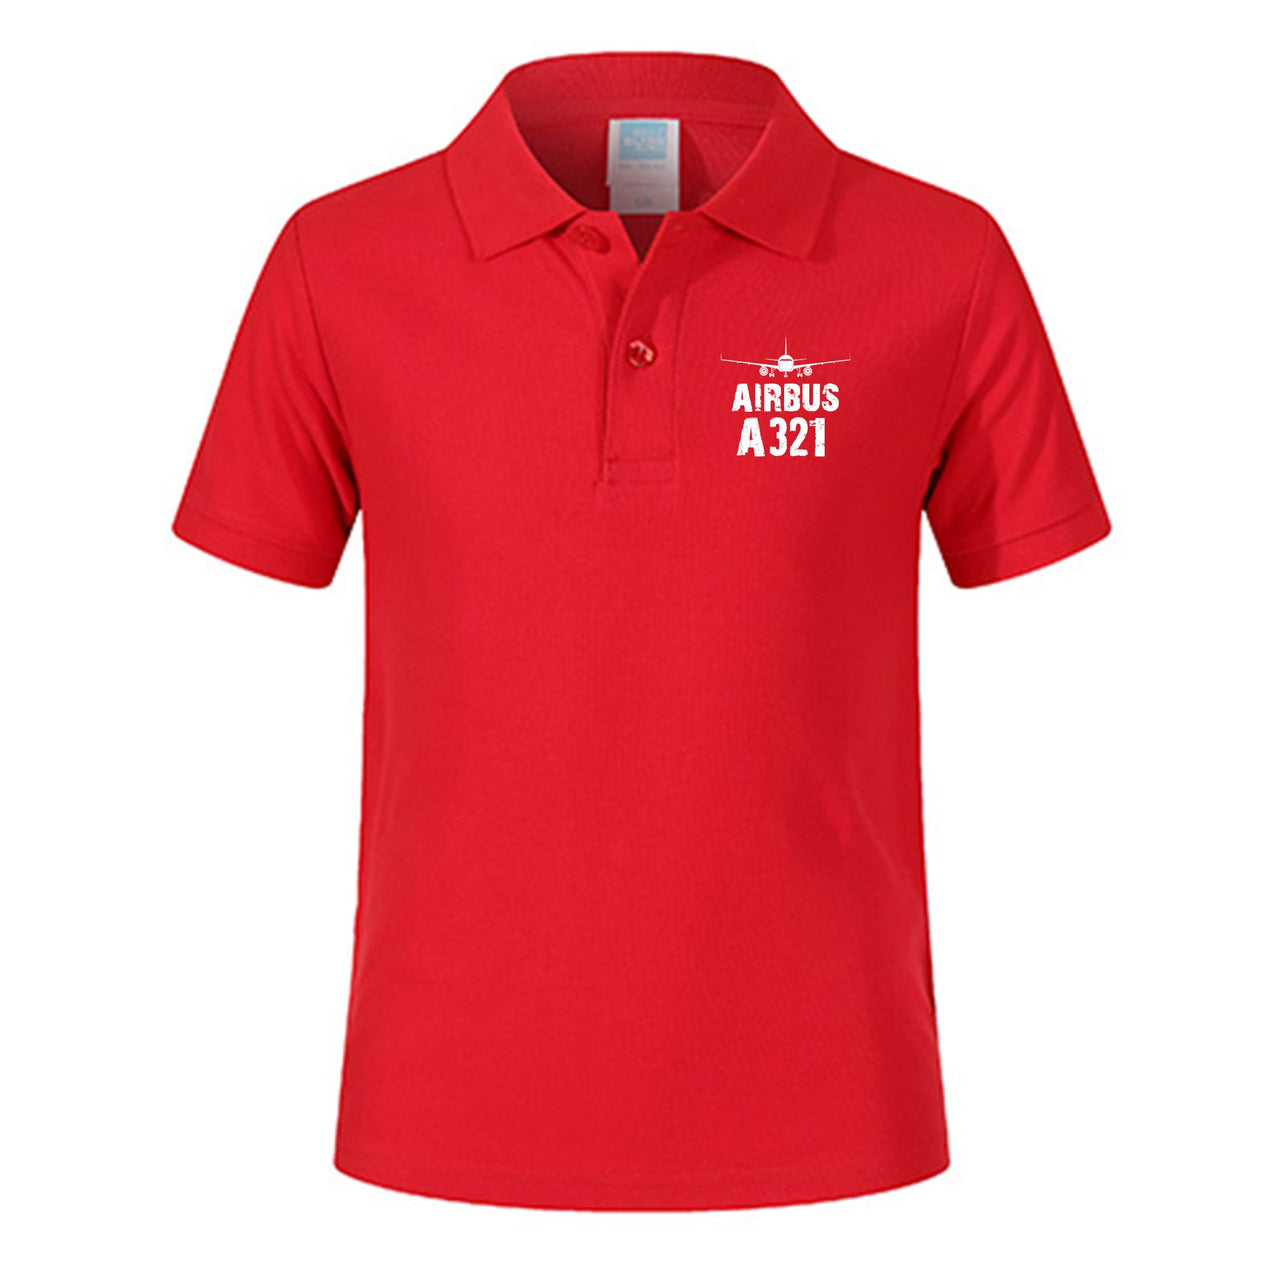 Airbus A321 & Plane Designed Children Polo T-Shirts